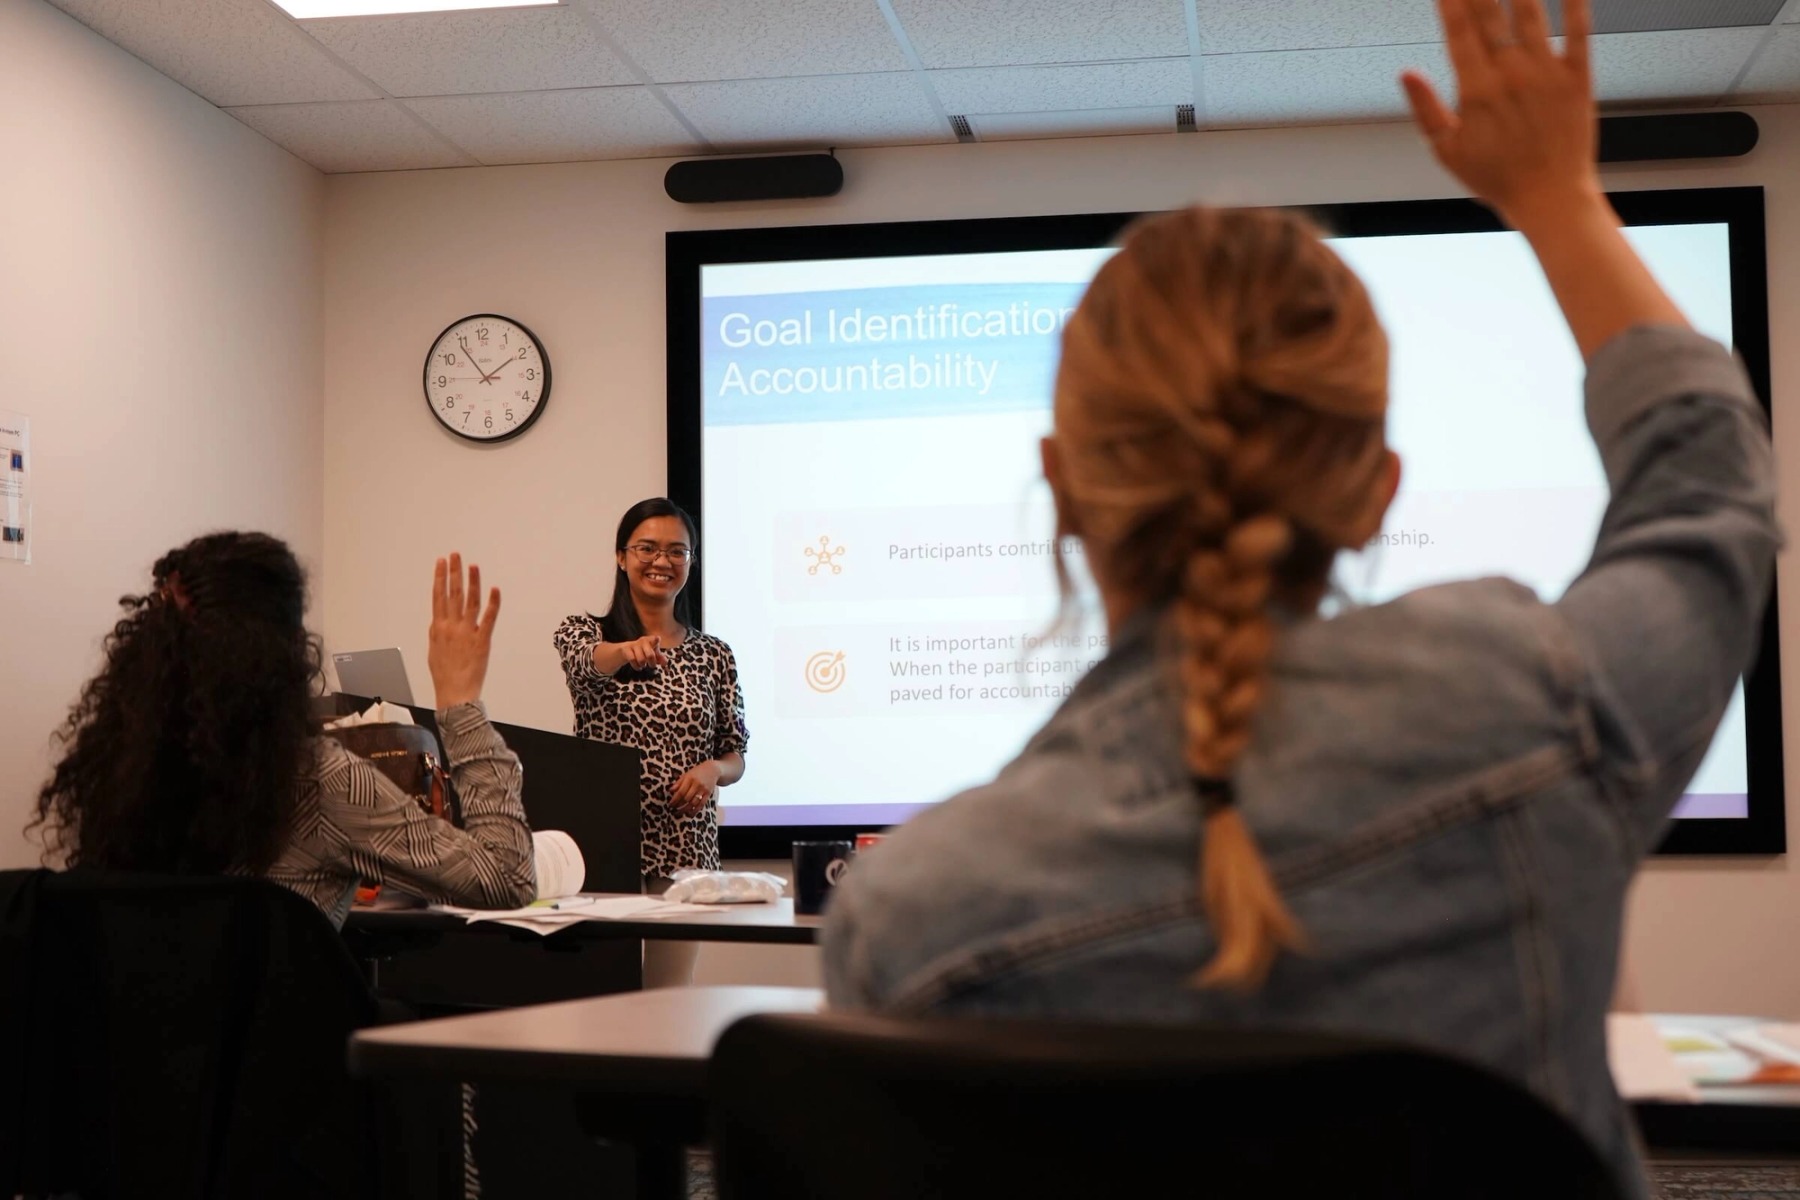 Two women raise their hands in a classroom.